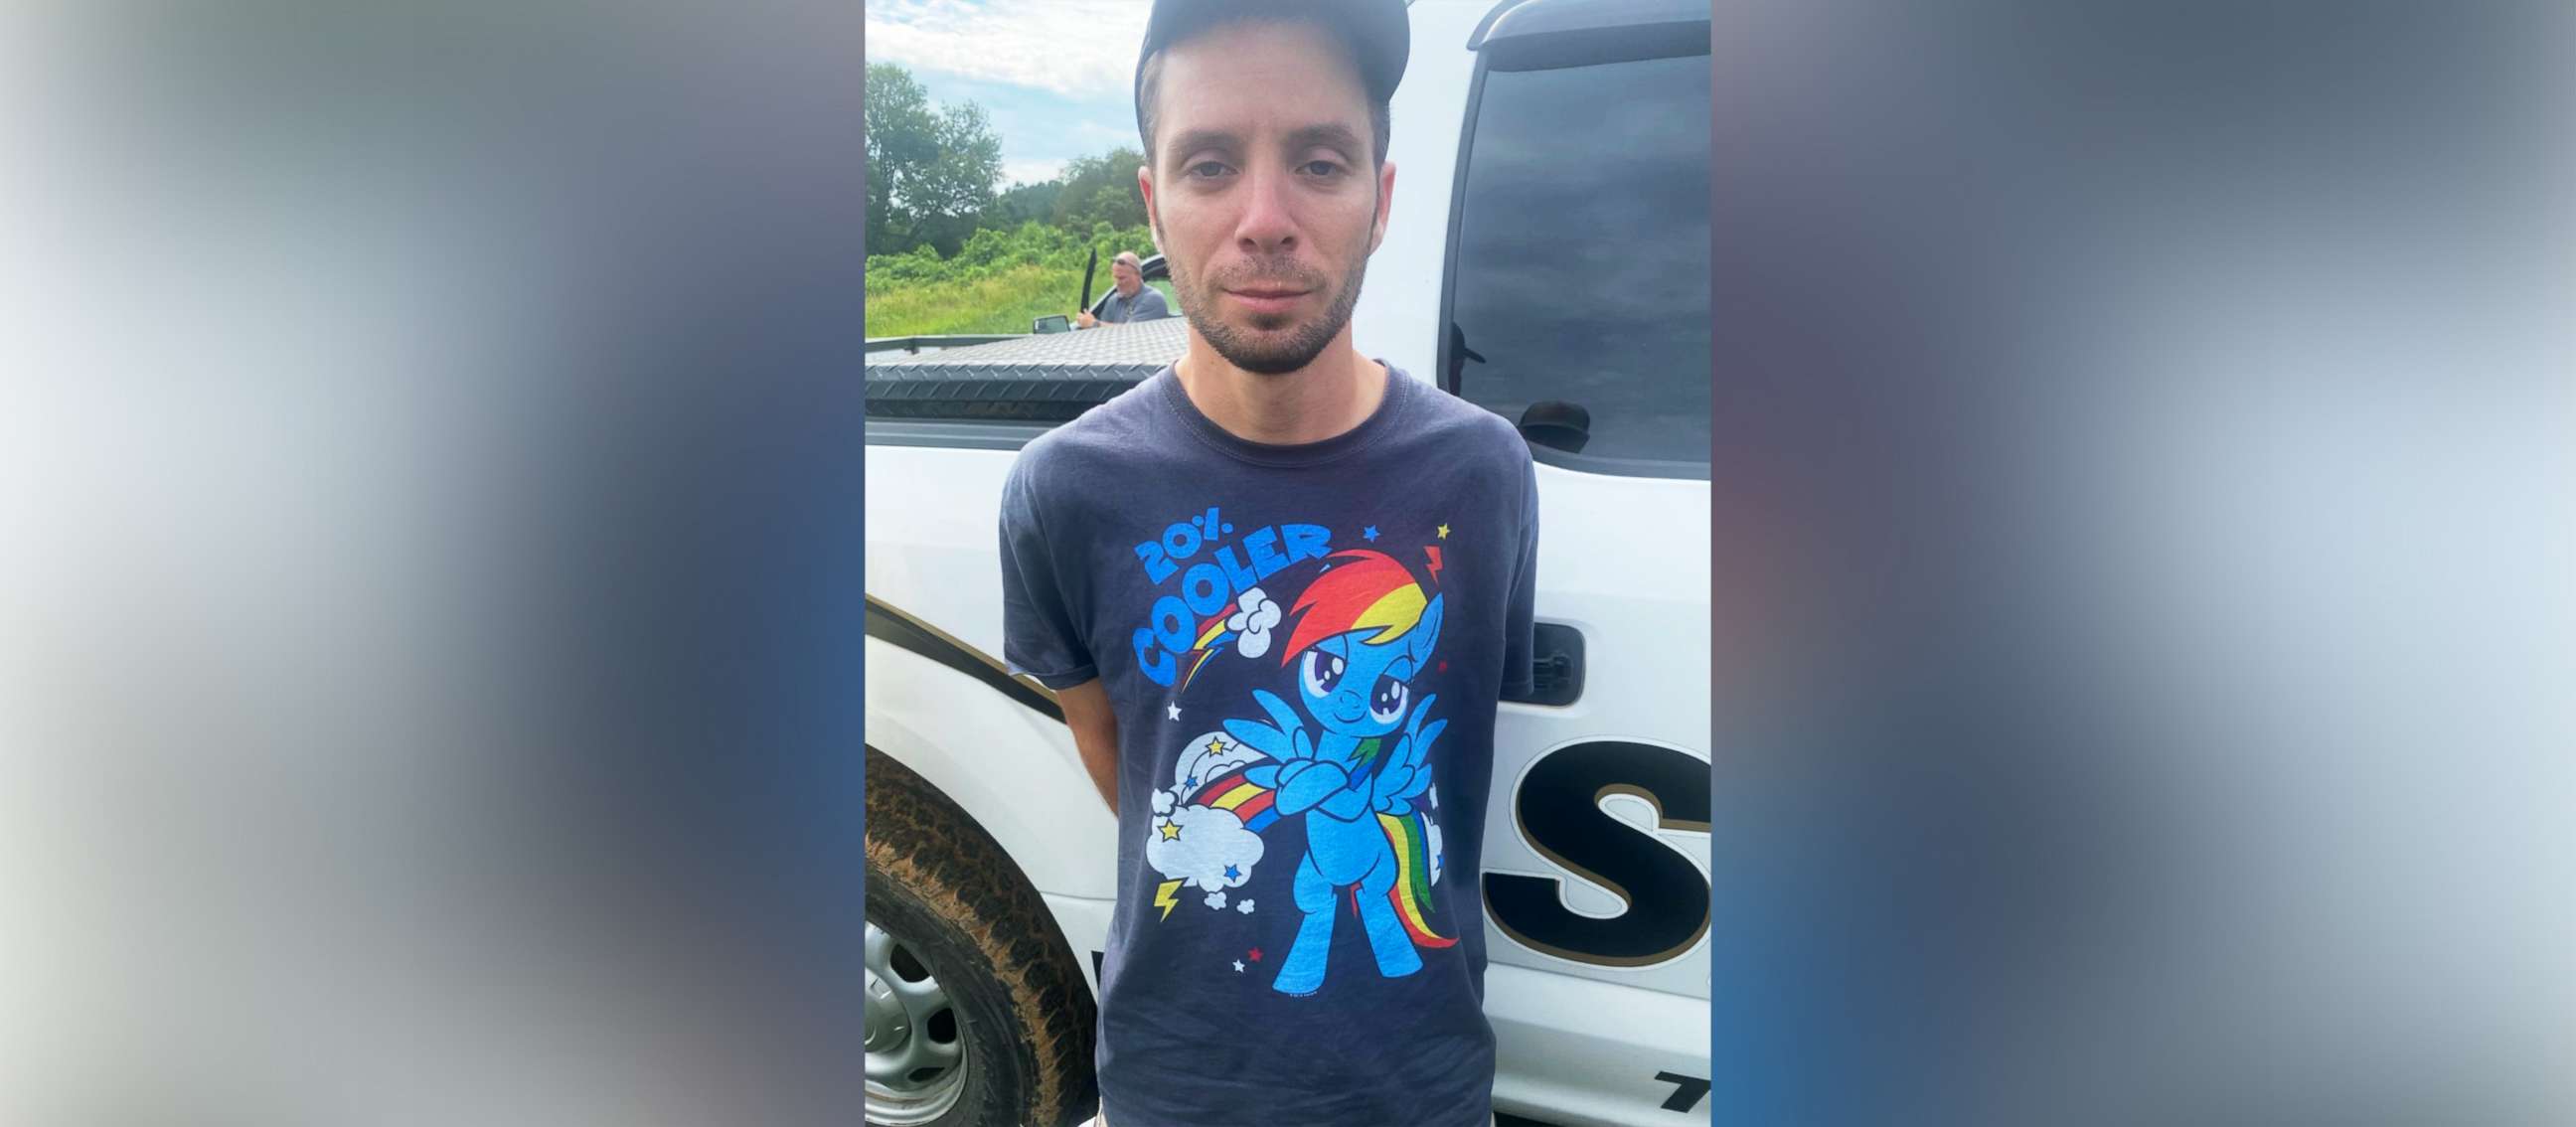 PHOTO: Cory Patterson, a man authorities say stole a plane and flew it over while threatening to crash it into a Walmart store in Tupelo, Miss. on Sept. 3, 2022, is pictured in an undated released by law enforcement.